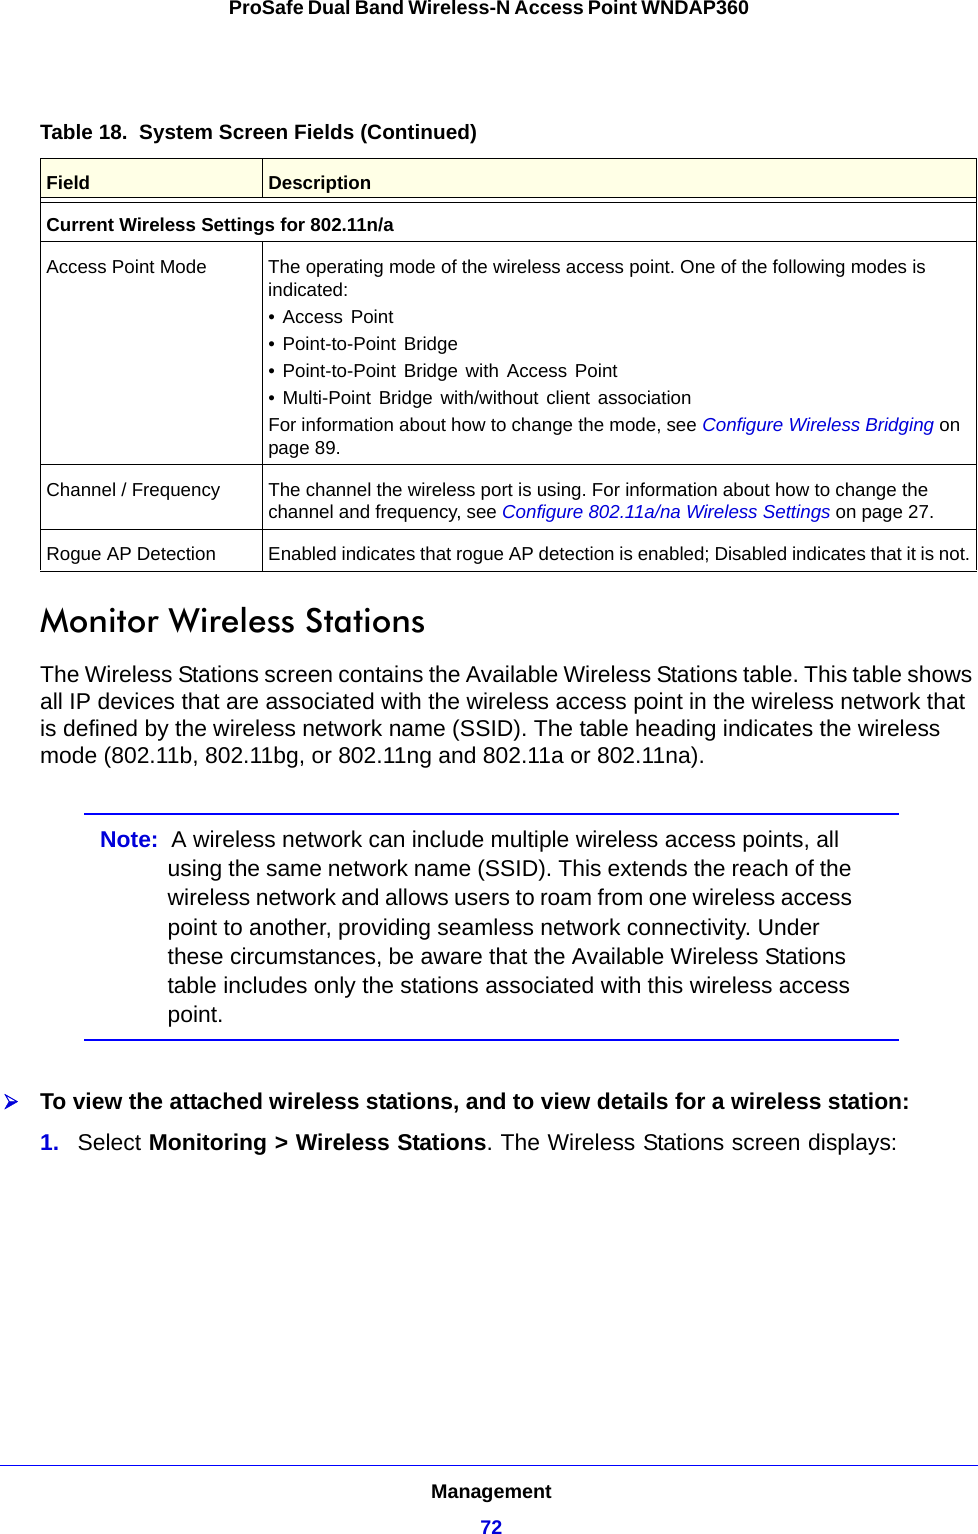 Management72ProSafe Dual Band Wireless-N Access Point WNDAP360 Monitor Wireless StationsThe Wireless Stations screen contains the Available Wireless Stations table. This table shows all IP devices that are associated with the wireless access point in the wireless network that is defined by the wireless network name (SSID). The table heading indicates the wireless mode (802.11b, 802.11bg, or 802.11ng and 802.11a or 802.11na).Note:  A wireless network can include multiple wireless access points, all using the same network name (SSID). This extends the reach of the wireless network and allows users to roam from one wireless access point to another, providing seamless network connectivity. Under these circumstances, be aware that the Available Wireless Stations table includes only the stations associated with this wireless access point.To view the attached wireless stations, and to view details for a wireless station:1.  Select Monitoring &gt; Wireless Stations. The Wireless Stations screen displays:Current Wireless Settings for 802.11n/aAccess Point Mode The operating mode of the wireless access point. One of the following modes is indicated:• Access Point• Point-to-Point Bridge• Point-to-Point Bridge with Access Point• Multi-Point Bridge with/without client associationFor information about how to change the mode, see Configure Wireless Bridging on page 89.Channel / Frequency The channel the wireless port is using. For information about how to change the channel and frequency, see Configure 802.11a/na Wireless Settings on page 27.Rogue AP Detection Enabled indicates that rogue AP detection is enabled; Disabled indicates that it is not.Table 18.  System Screen Fields (Continued)Field  Description